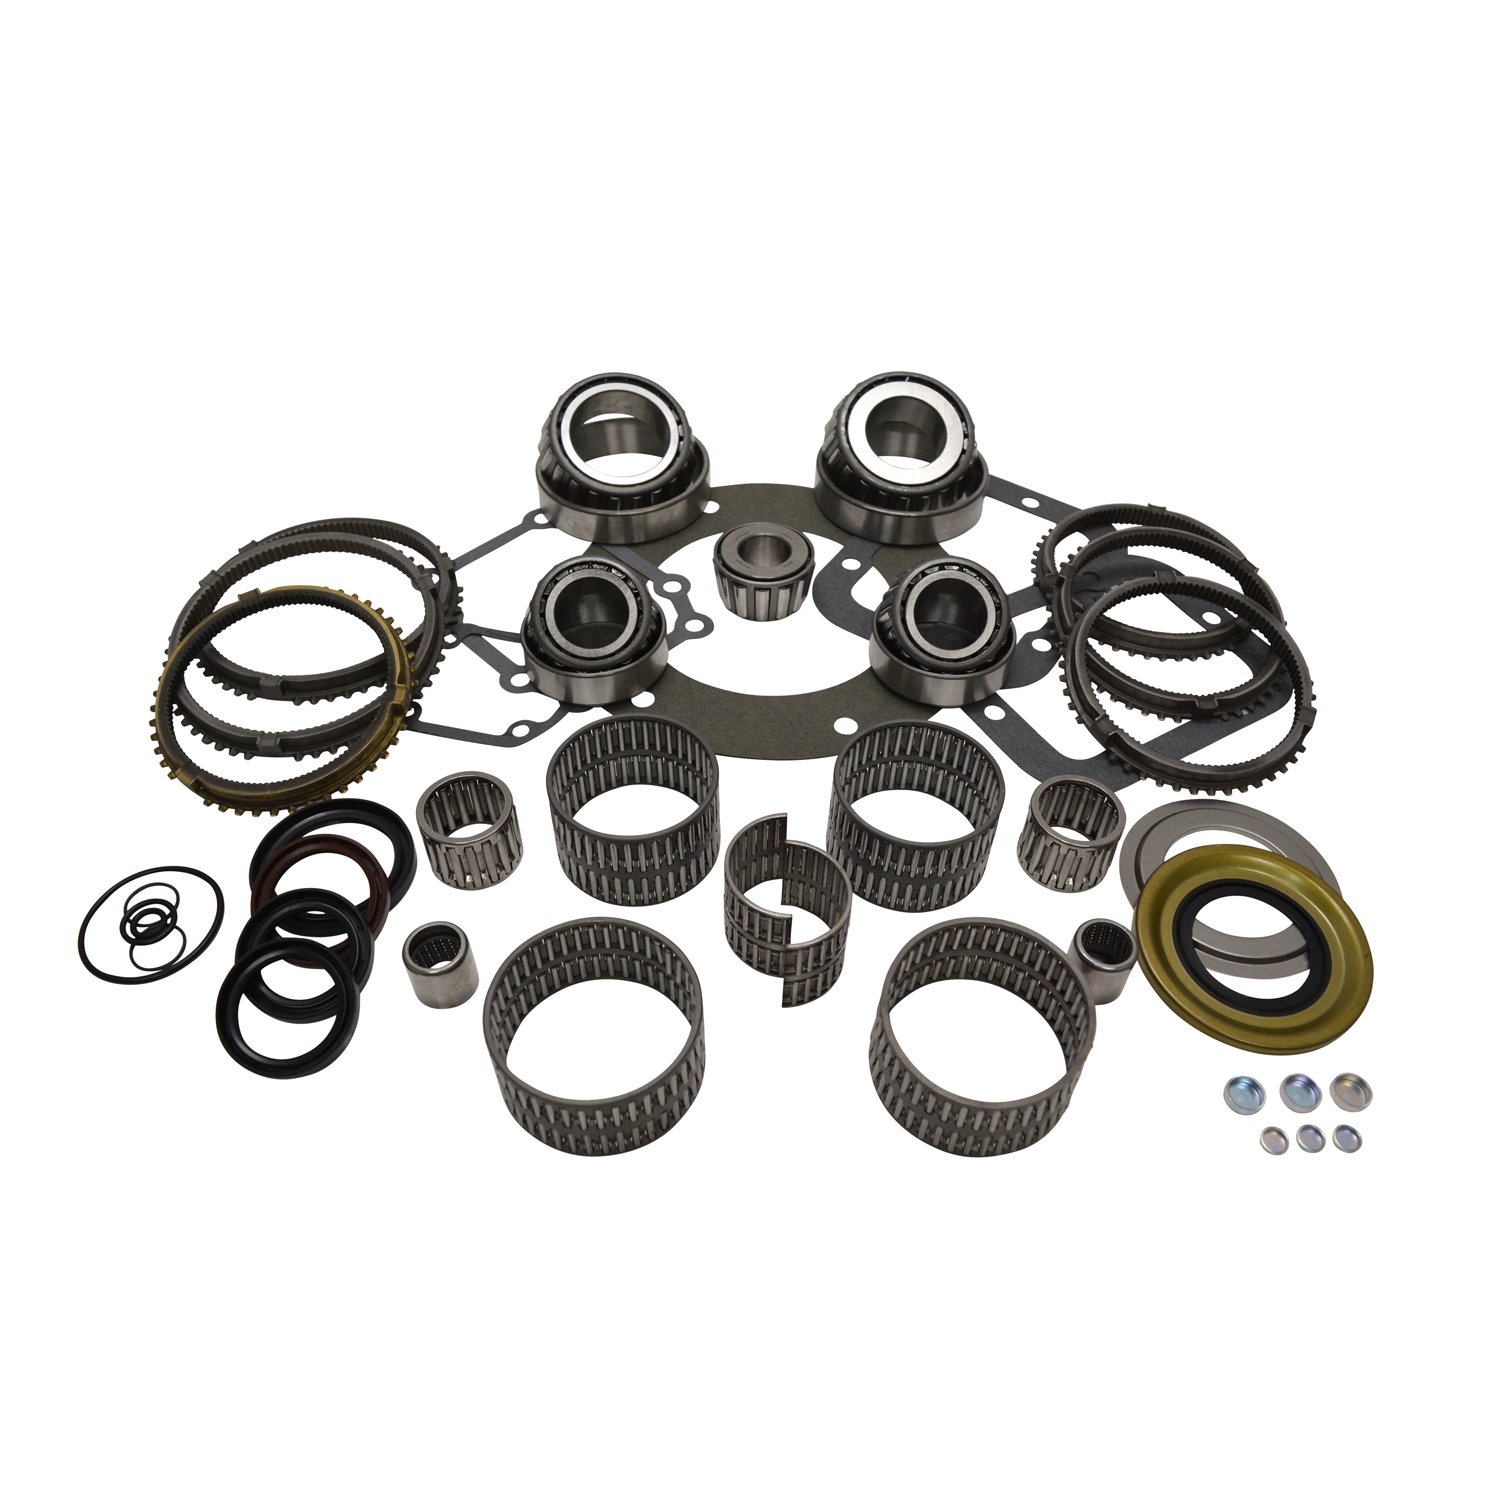 USA Standard 76689 Manual Transmission Zf S547/M Bearing Kit With Synchro'S